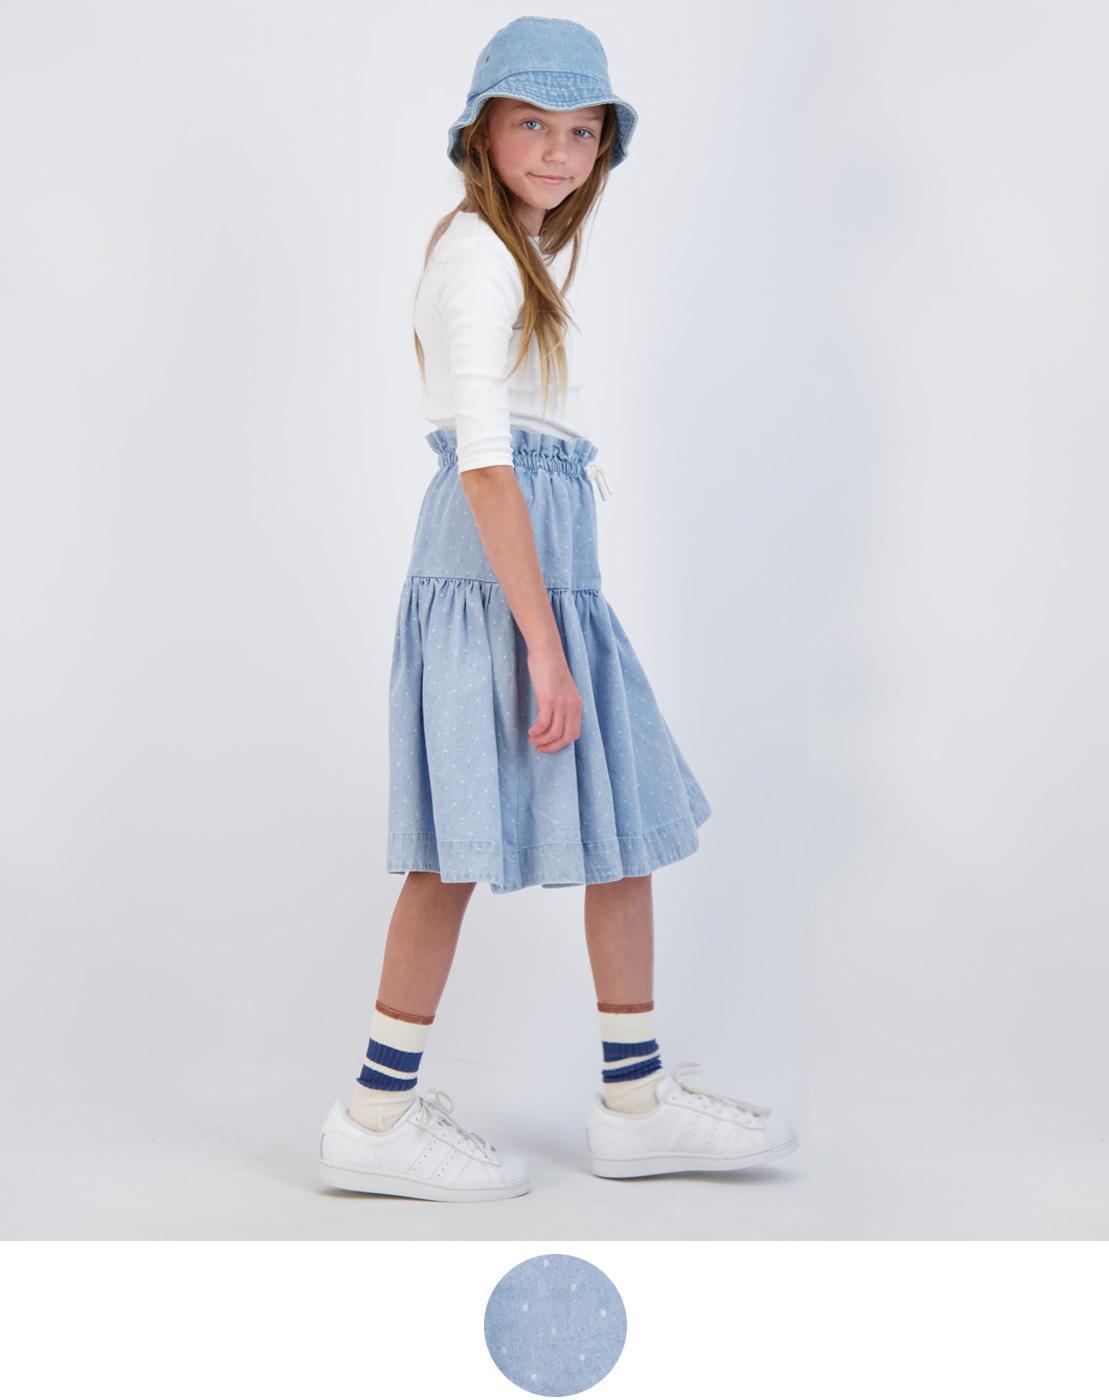 Analogie by Lil Legs Printed Denim Collection Girls Dot Skirt